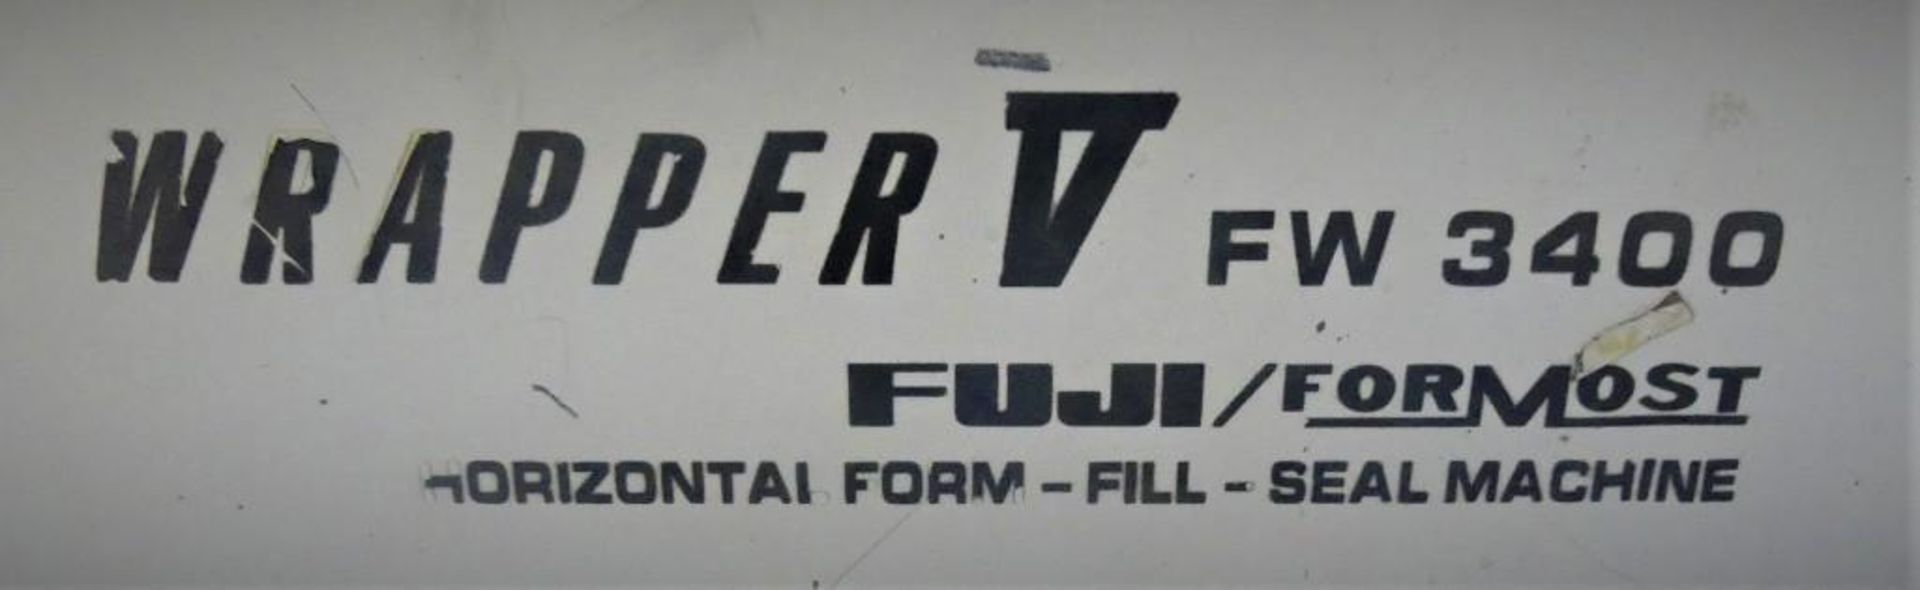 Fuji Formost FW-3400 Horizontal Form Fill and Seal - Image 22 of 22